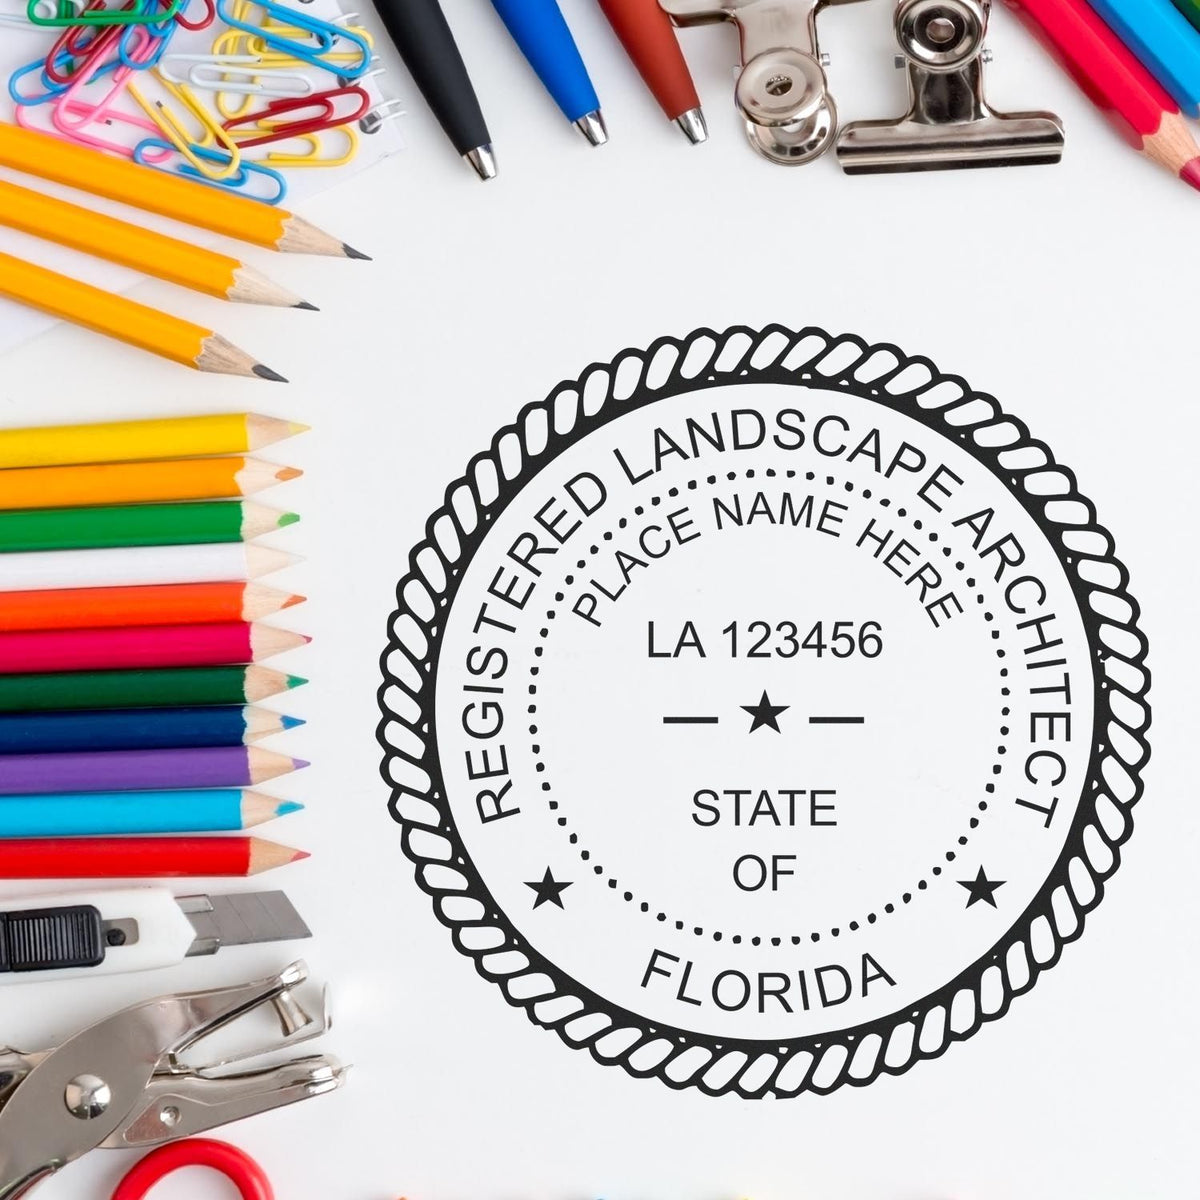 A lifestyle photo showing a stamped image of the Digital Florida Landscape Architect Stamp on a piece of paper